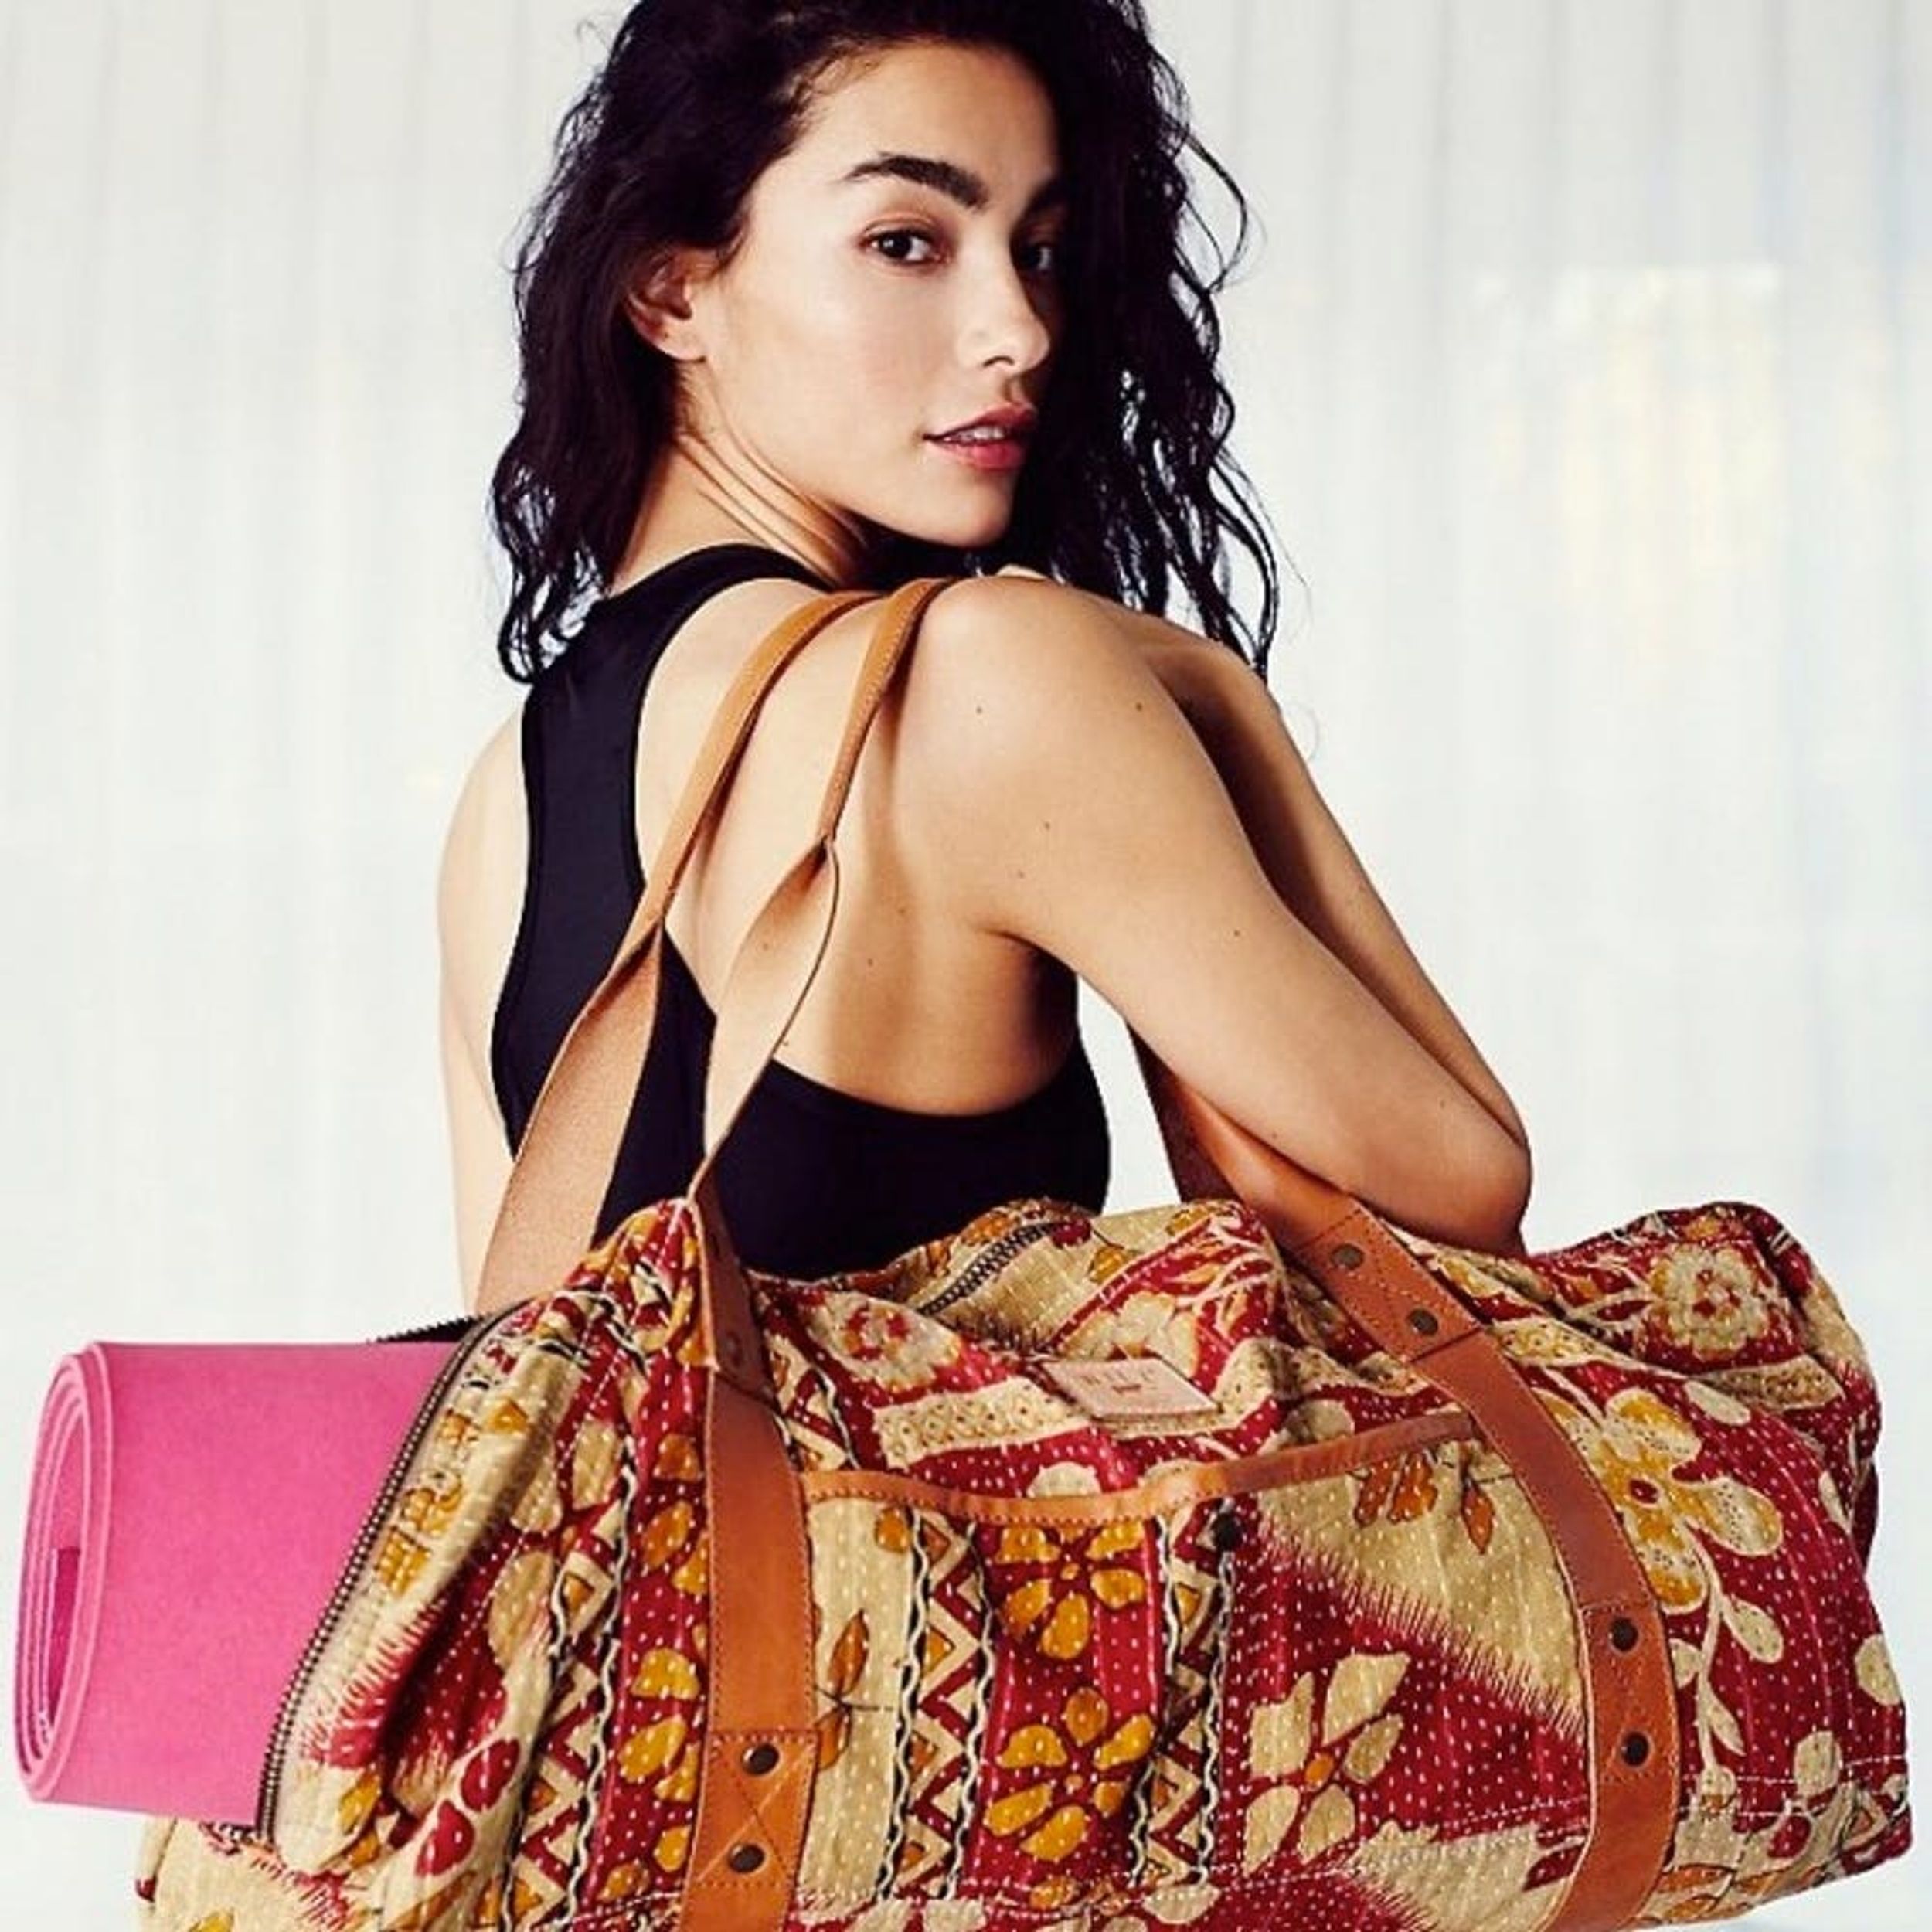 16 Essentials Every Yoga Lover Should Have in Their Bag